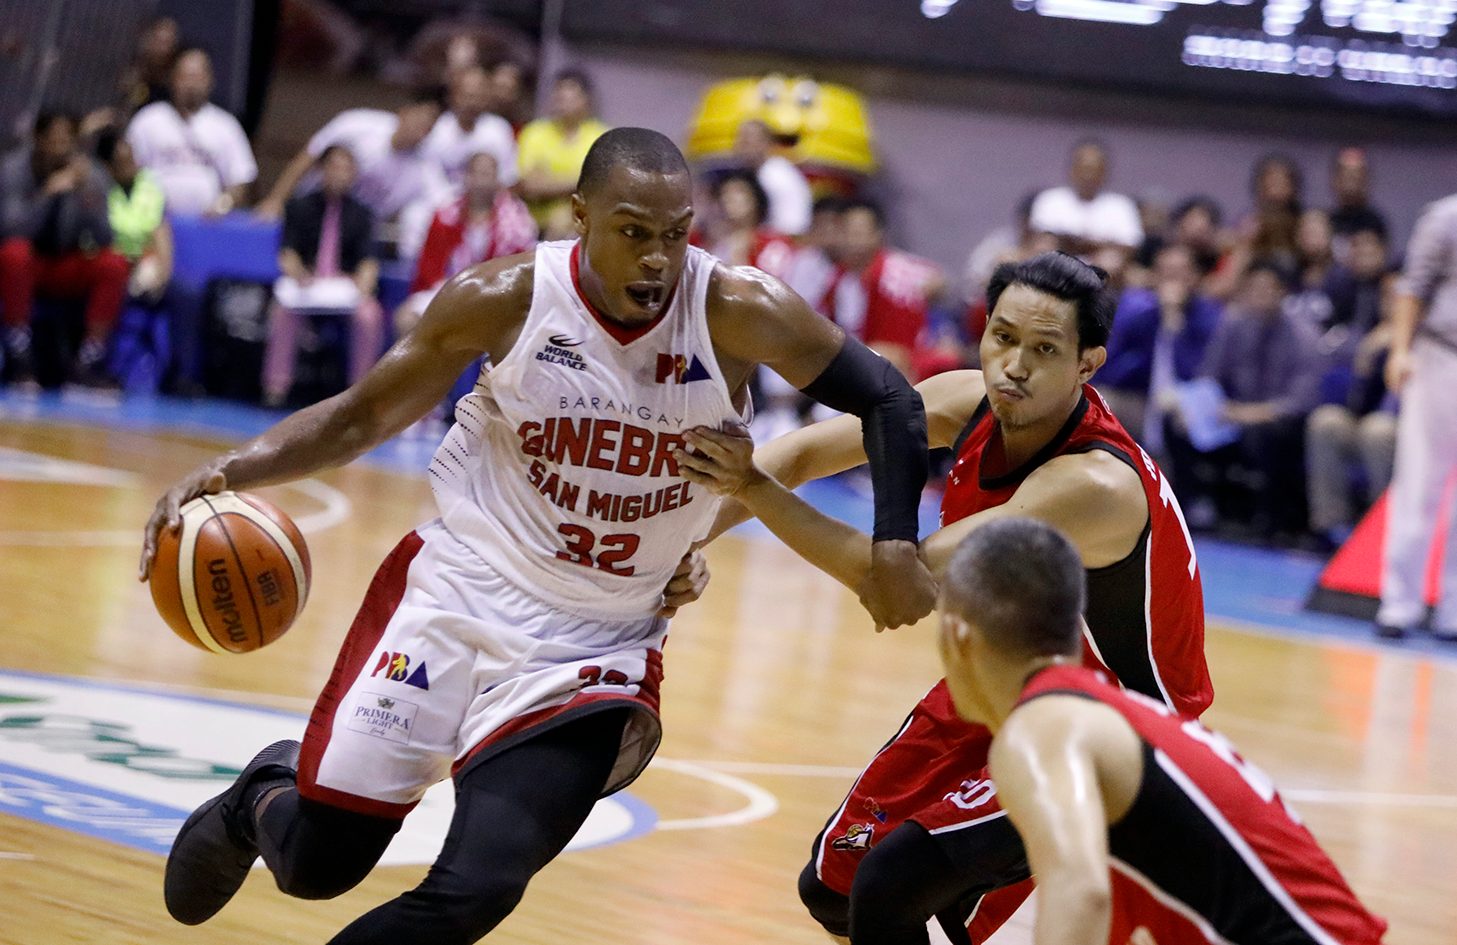 PBA Governors’ Cup slated for December 8 tip-off